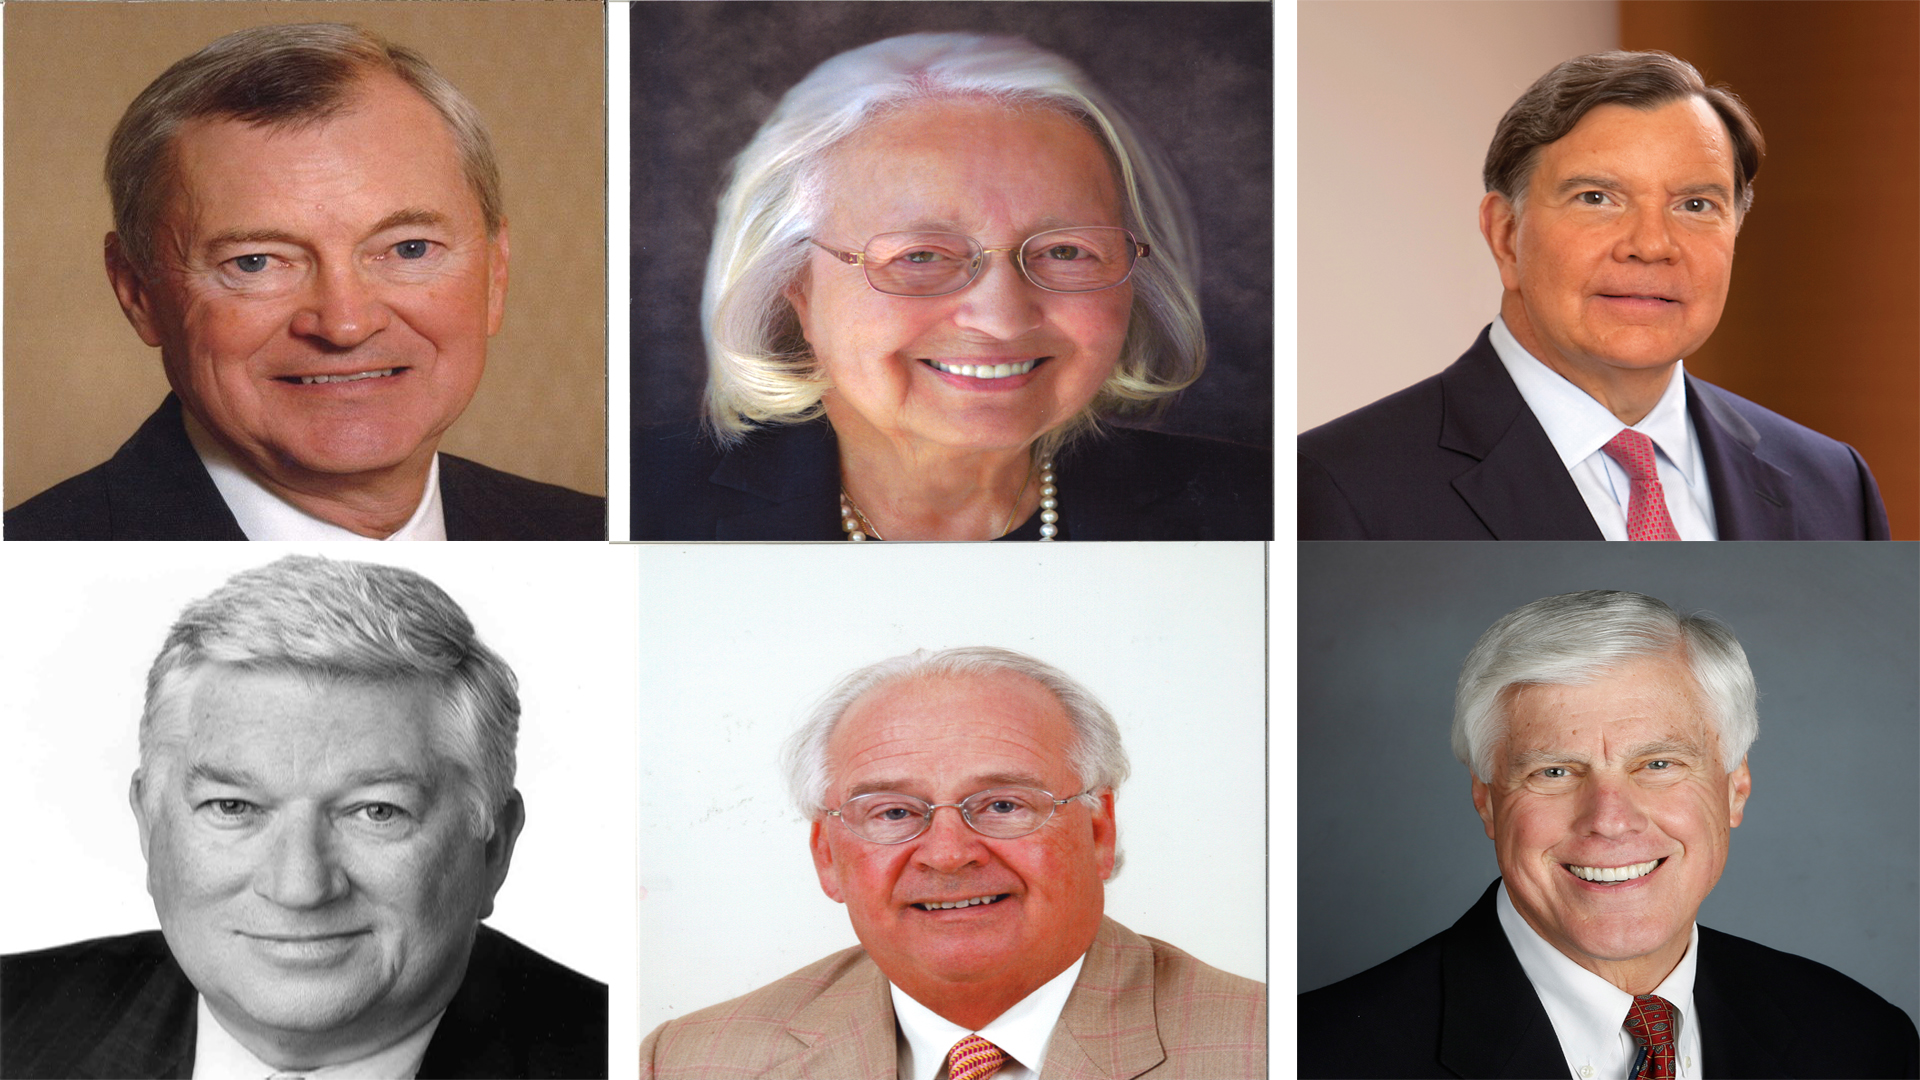 UA’s Culverhouse Announces 2017 Business Hall of Fame Inductees